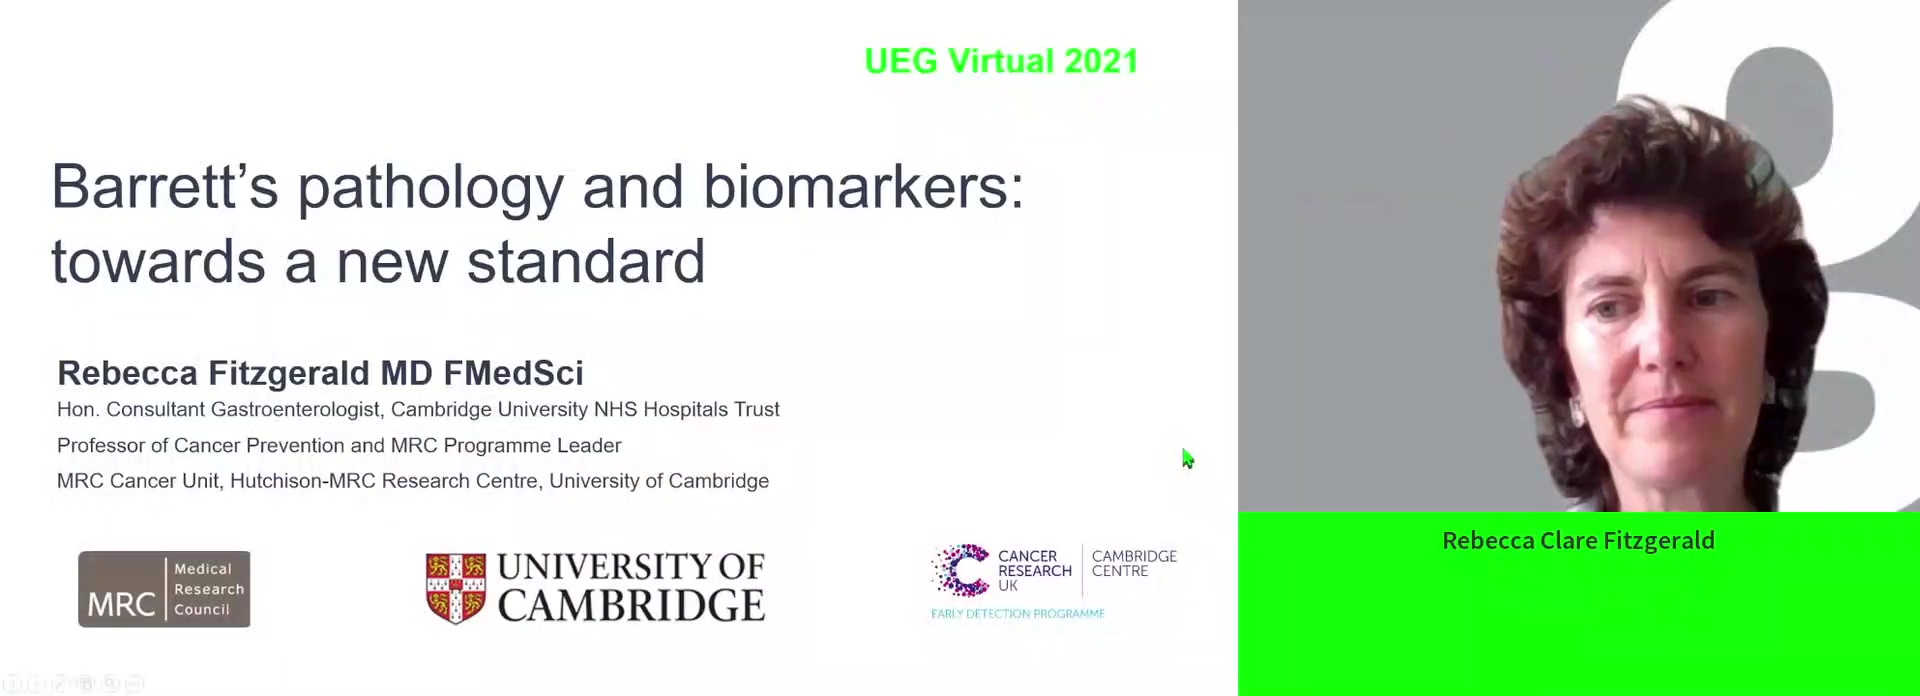 Barrett's pathology and biomarkers: Towards a new standard?